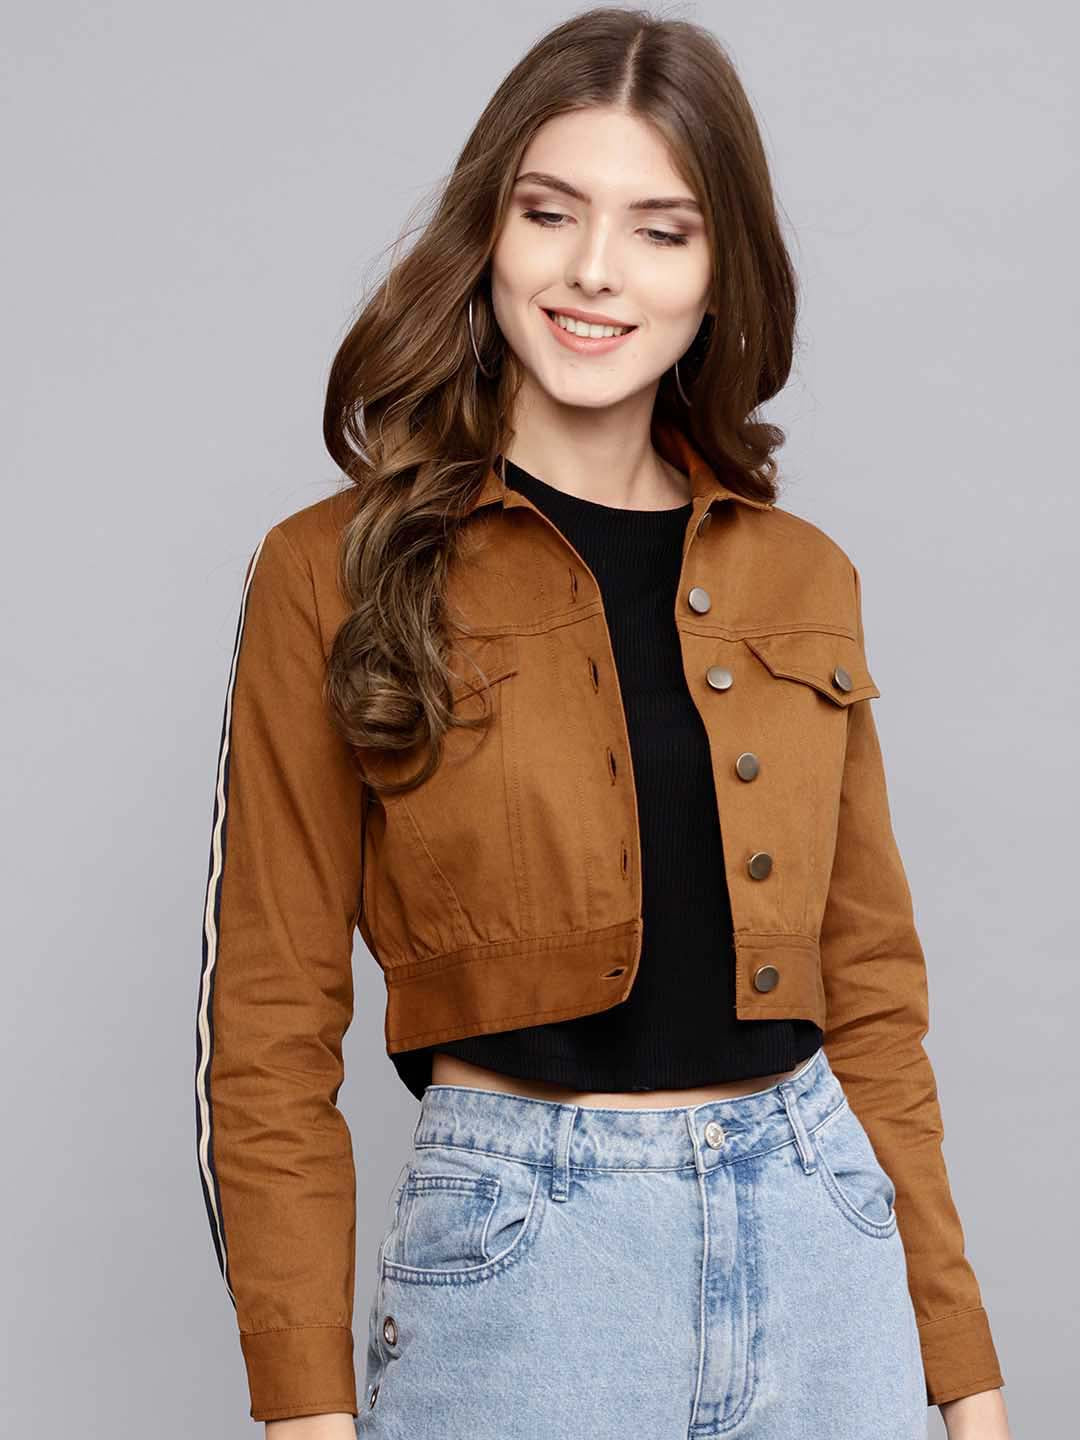 crop top jacket for girls Cheap Sale - OFF 53%